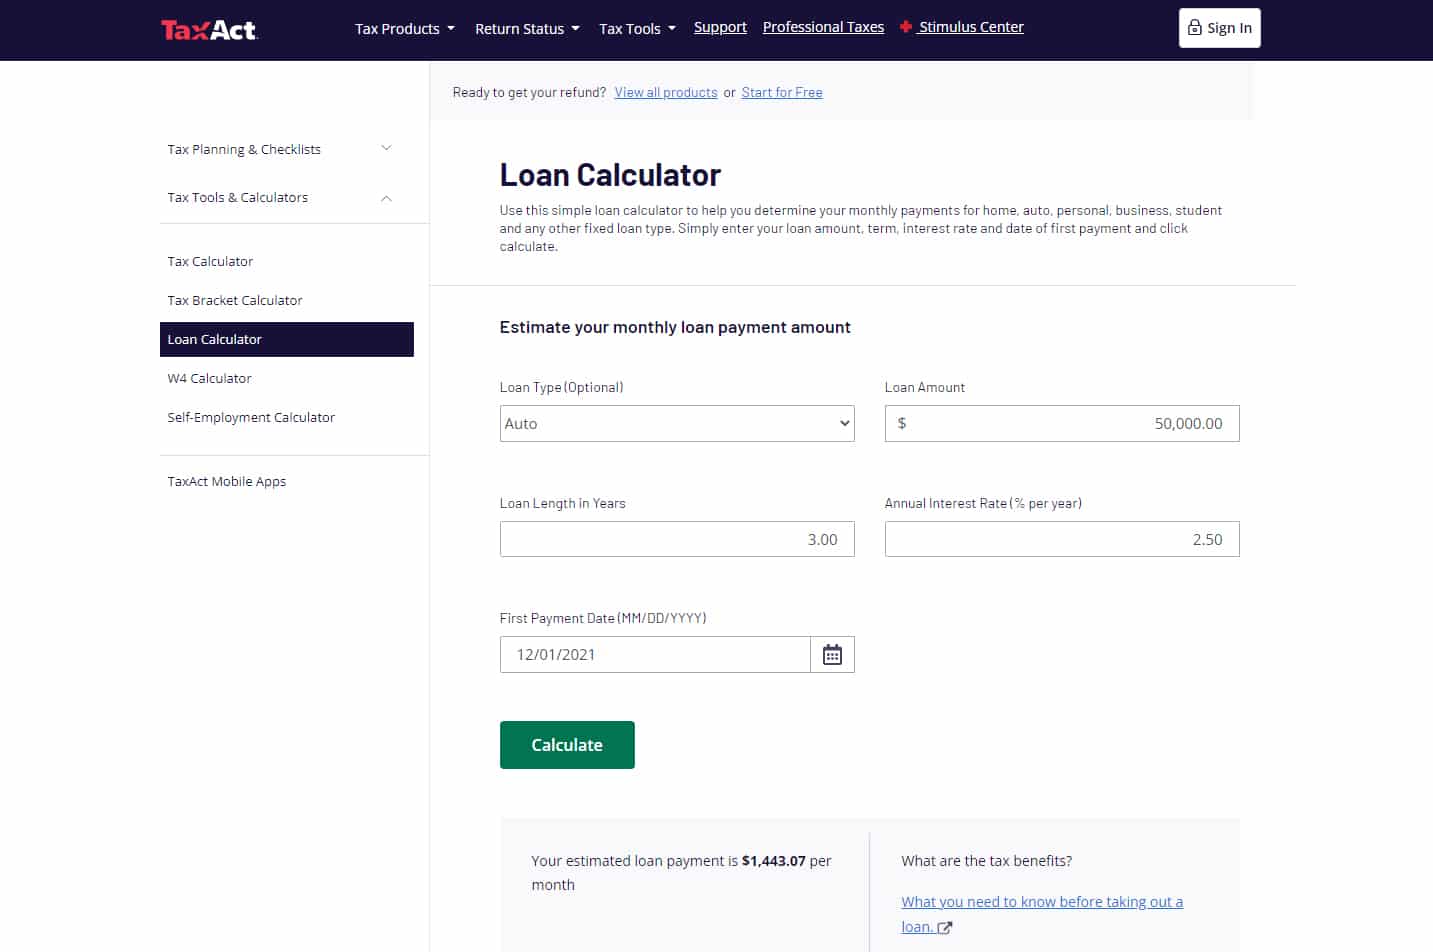 You can determine your monthly loan payment amount using TaxAct Loan Calculator.